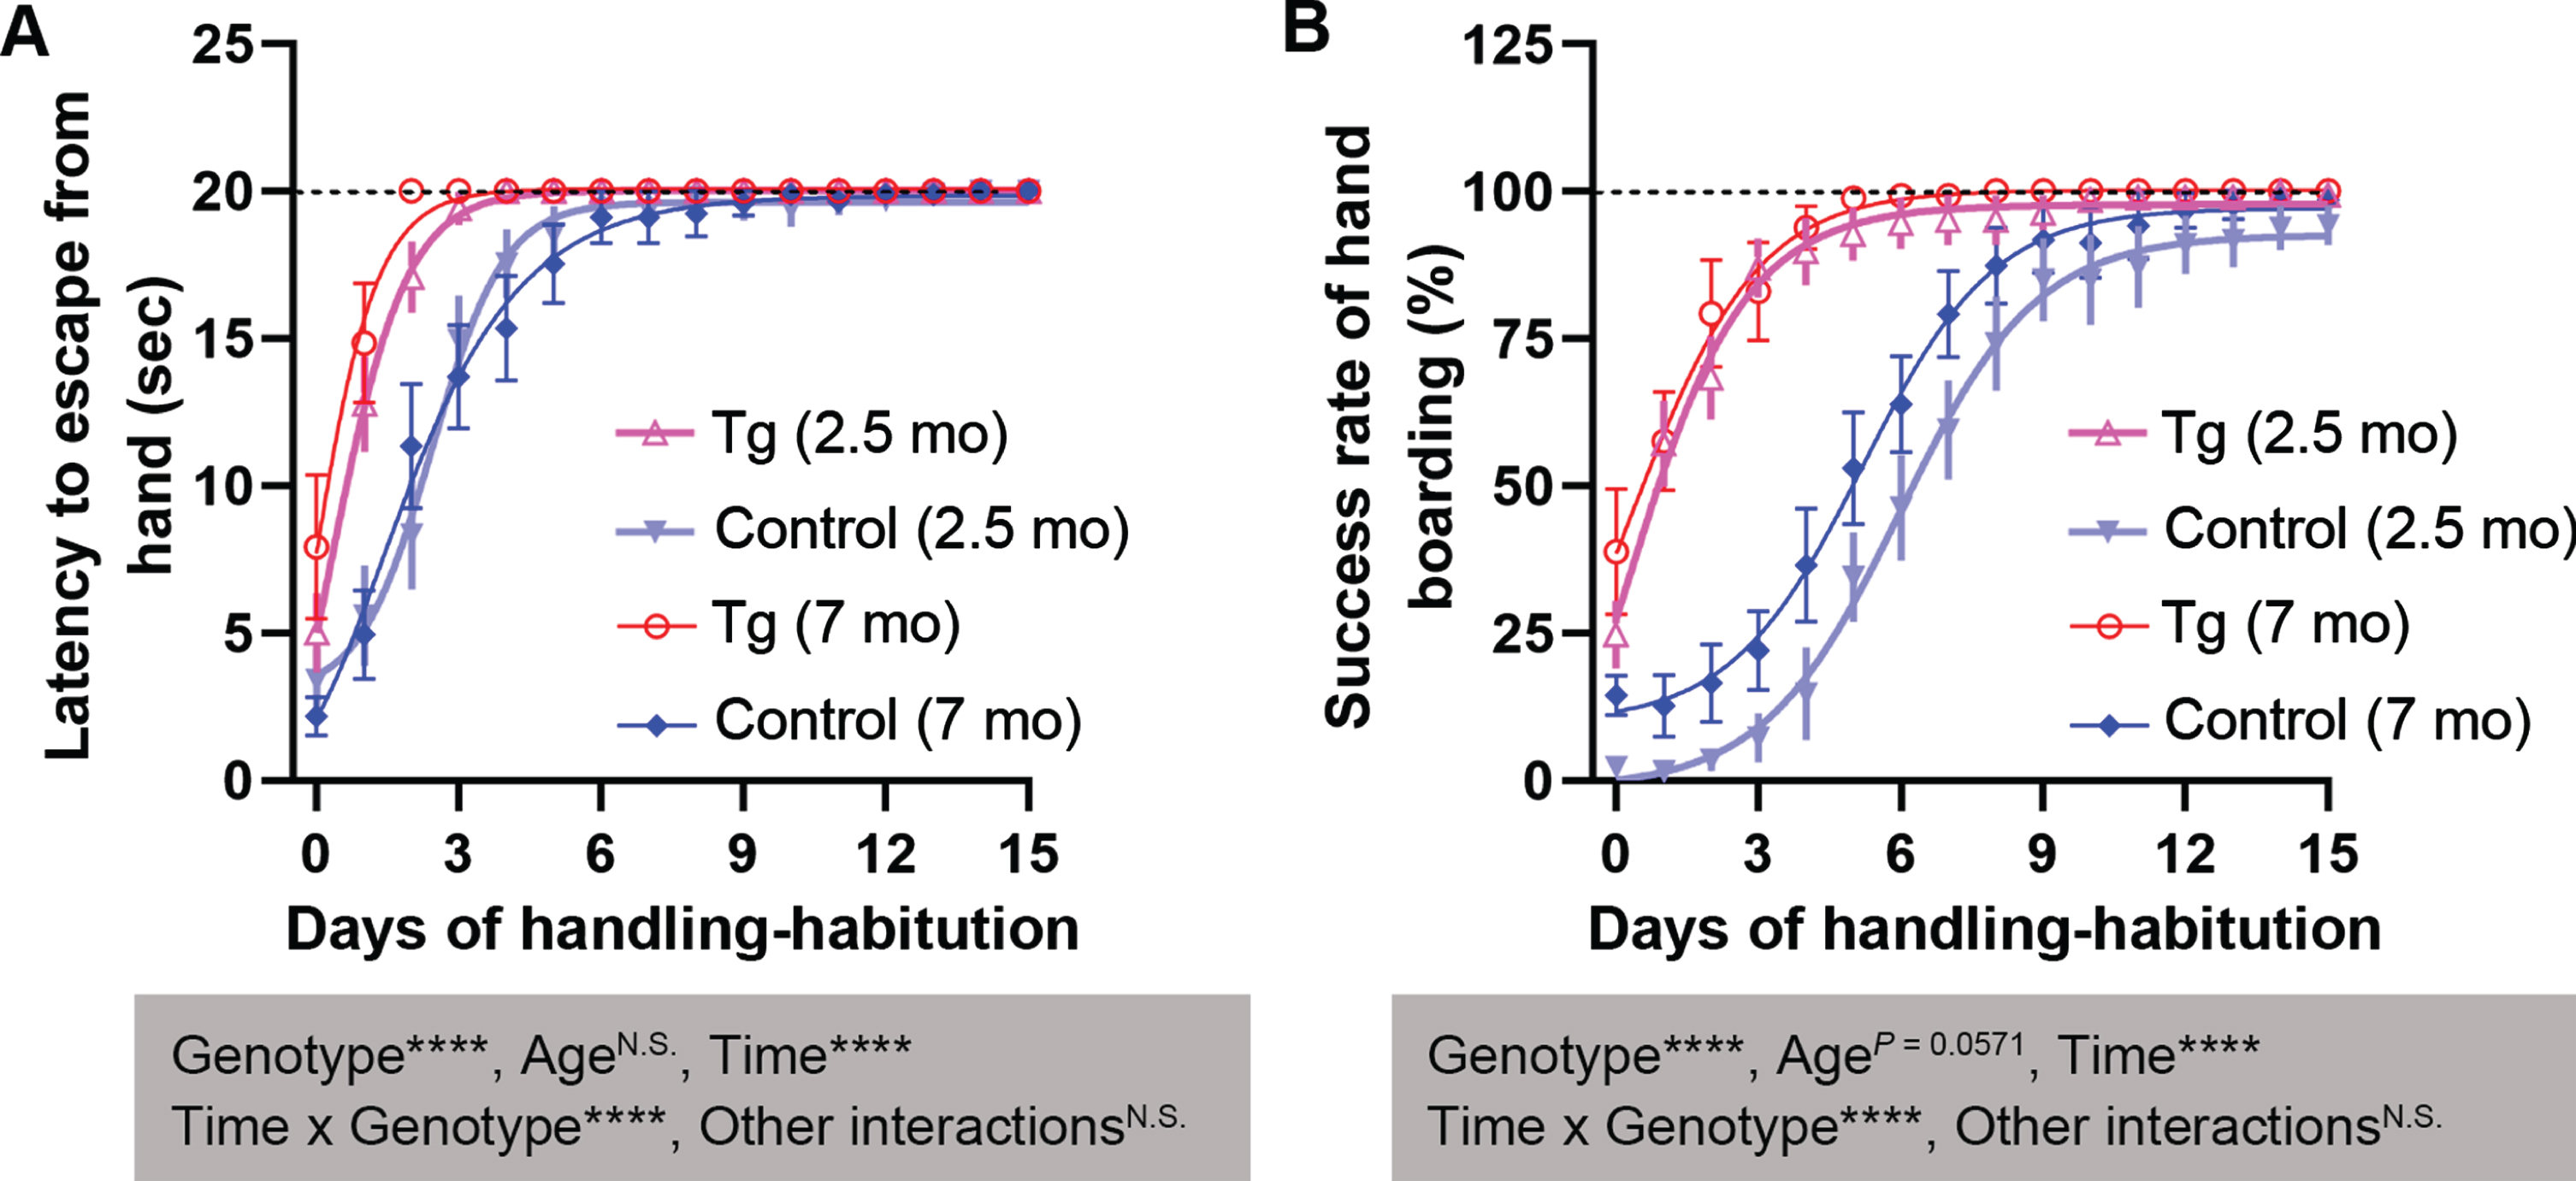 The 2.5- and 7-month-old 3×Tg-AD mice are handling-habituated more quickly than age-matched B6;129 genetic control mice. A) Hand-staying assay. B) Hand-boarding assay. Data are expressed as mean±SEM (n = 12−23 mice/condition) and analyzed with repeated-measures ANOVA. The Boltzmann sigmoidal and Gompertz growth models are employed for curve fit (see Table 1 for the equations). Shaded boxes show main factor effects and interactions. The dashed line shows the cutoff value (A) or the maximal percentage (B). ****p < 0.0001. mo, months.